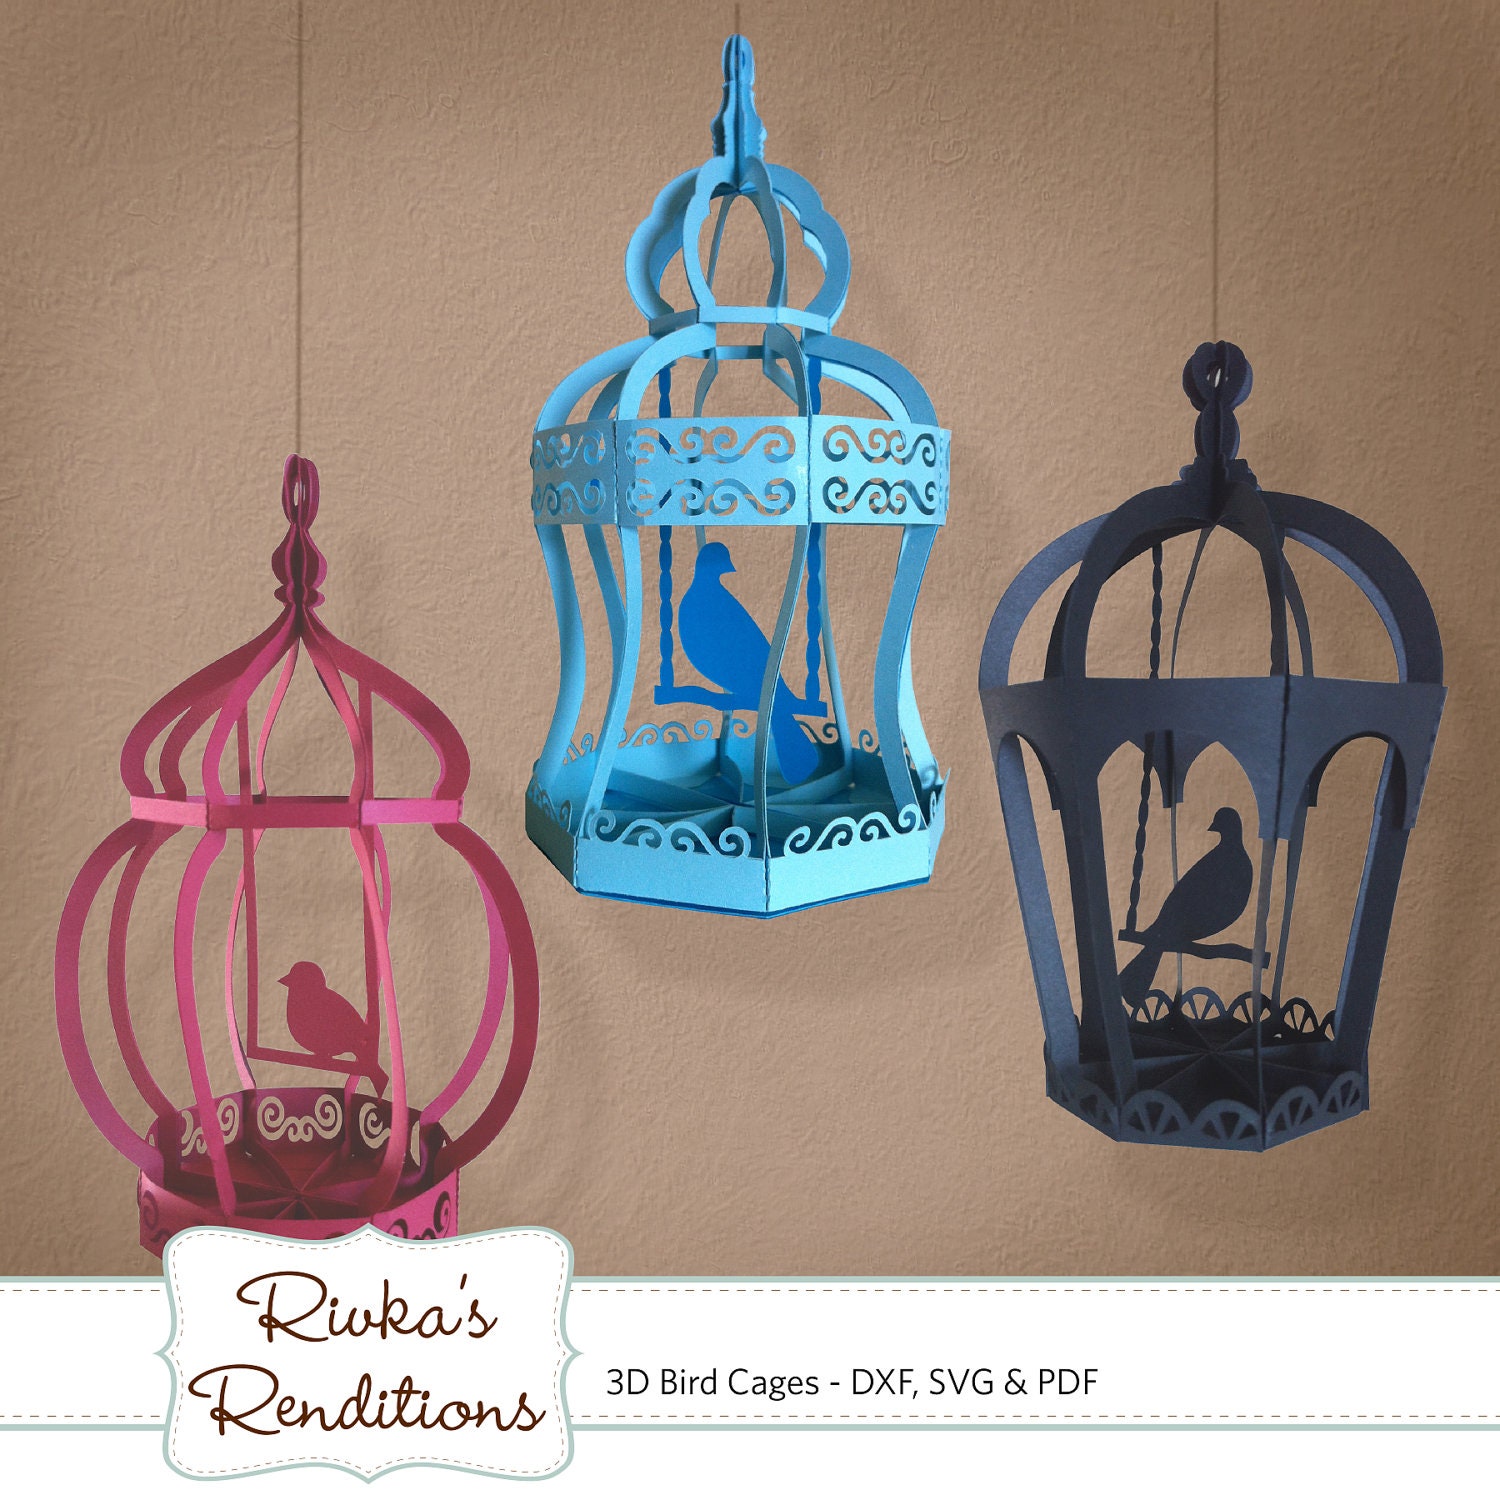 Download 3D Bird Cages Digital Cut File and Template DXF SVG and PDF